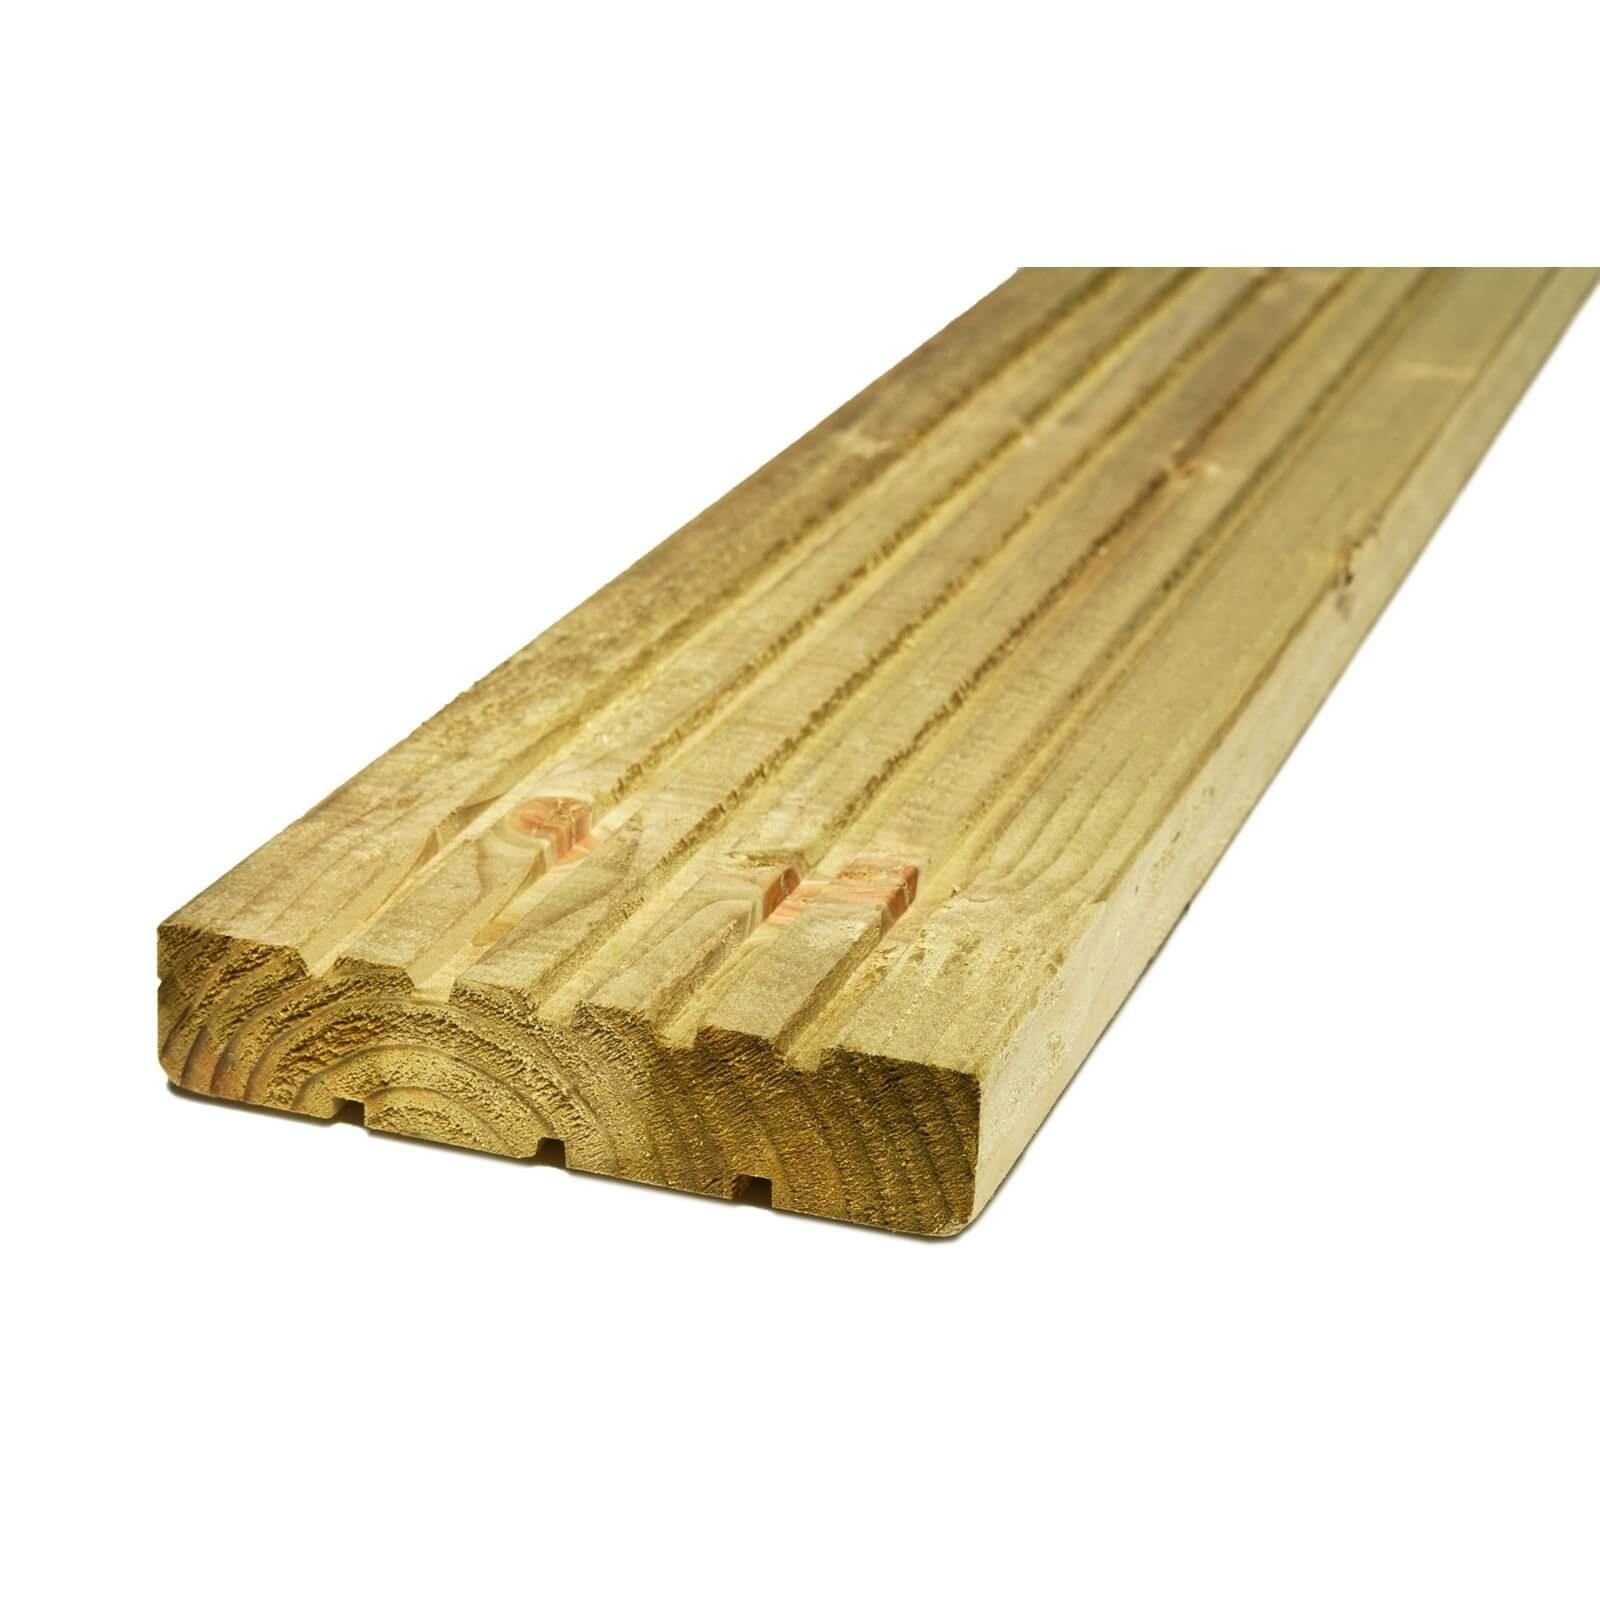 Photo of Softwood Deck Board - 28 X 144mm X 2.4m